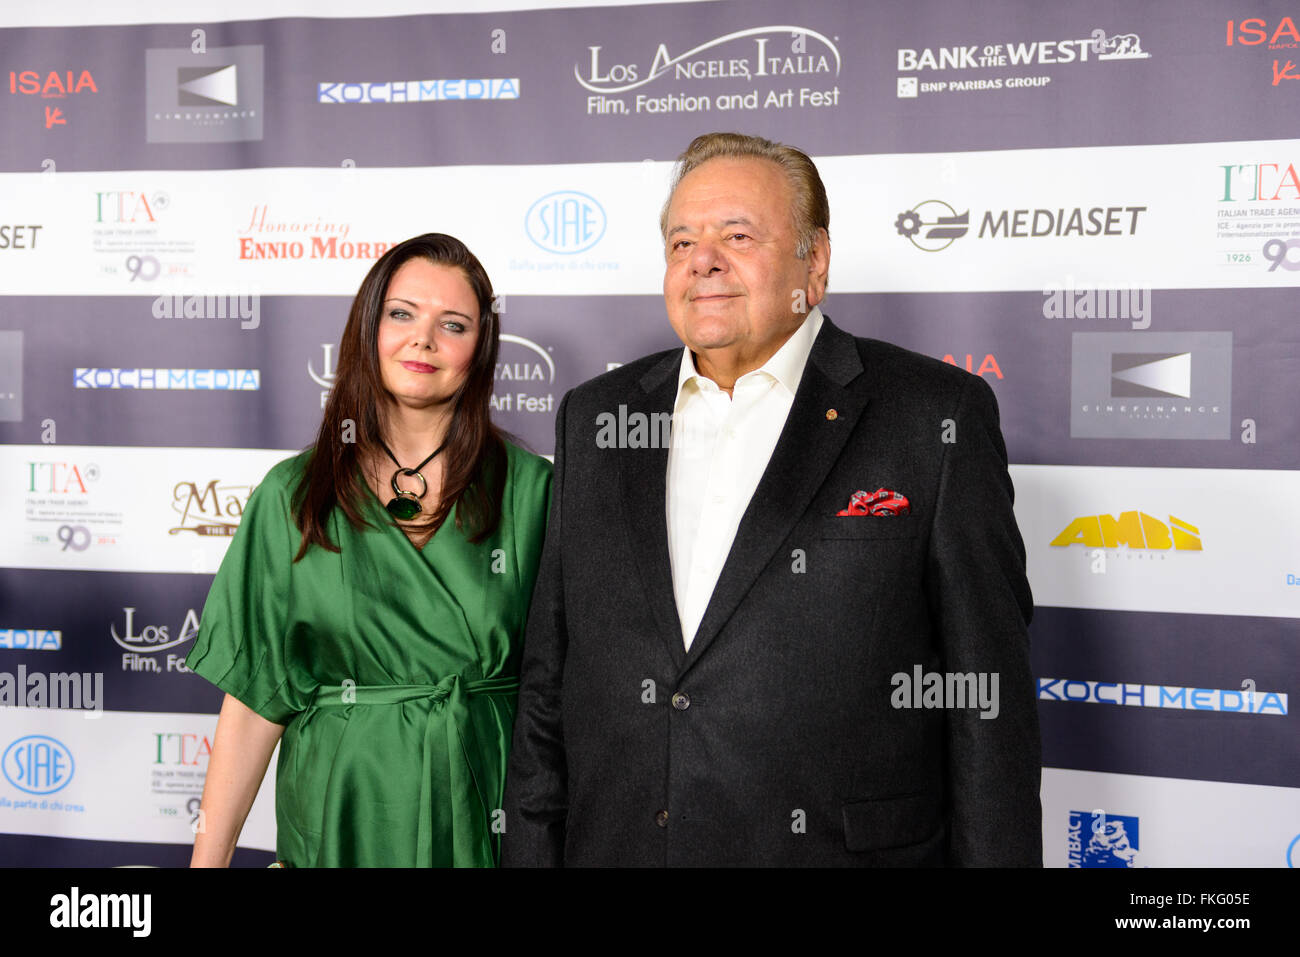 FEBRUARY 22, 2016: The actor Paul Sorvino and his wife Dee Dee Benkie at the Los Angeles Italian Film Festival. Stock Photo